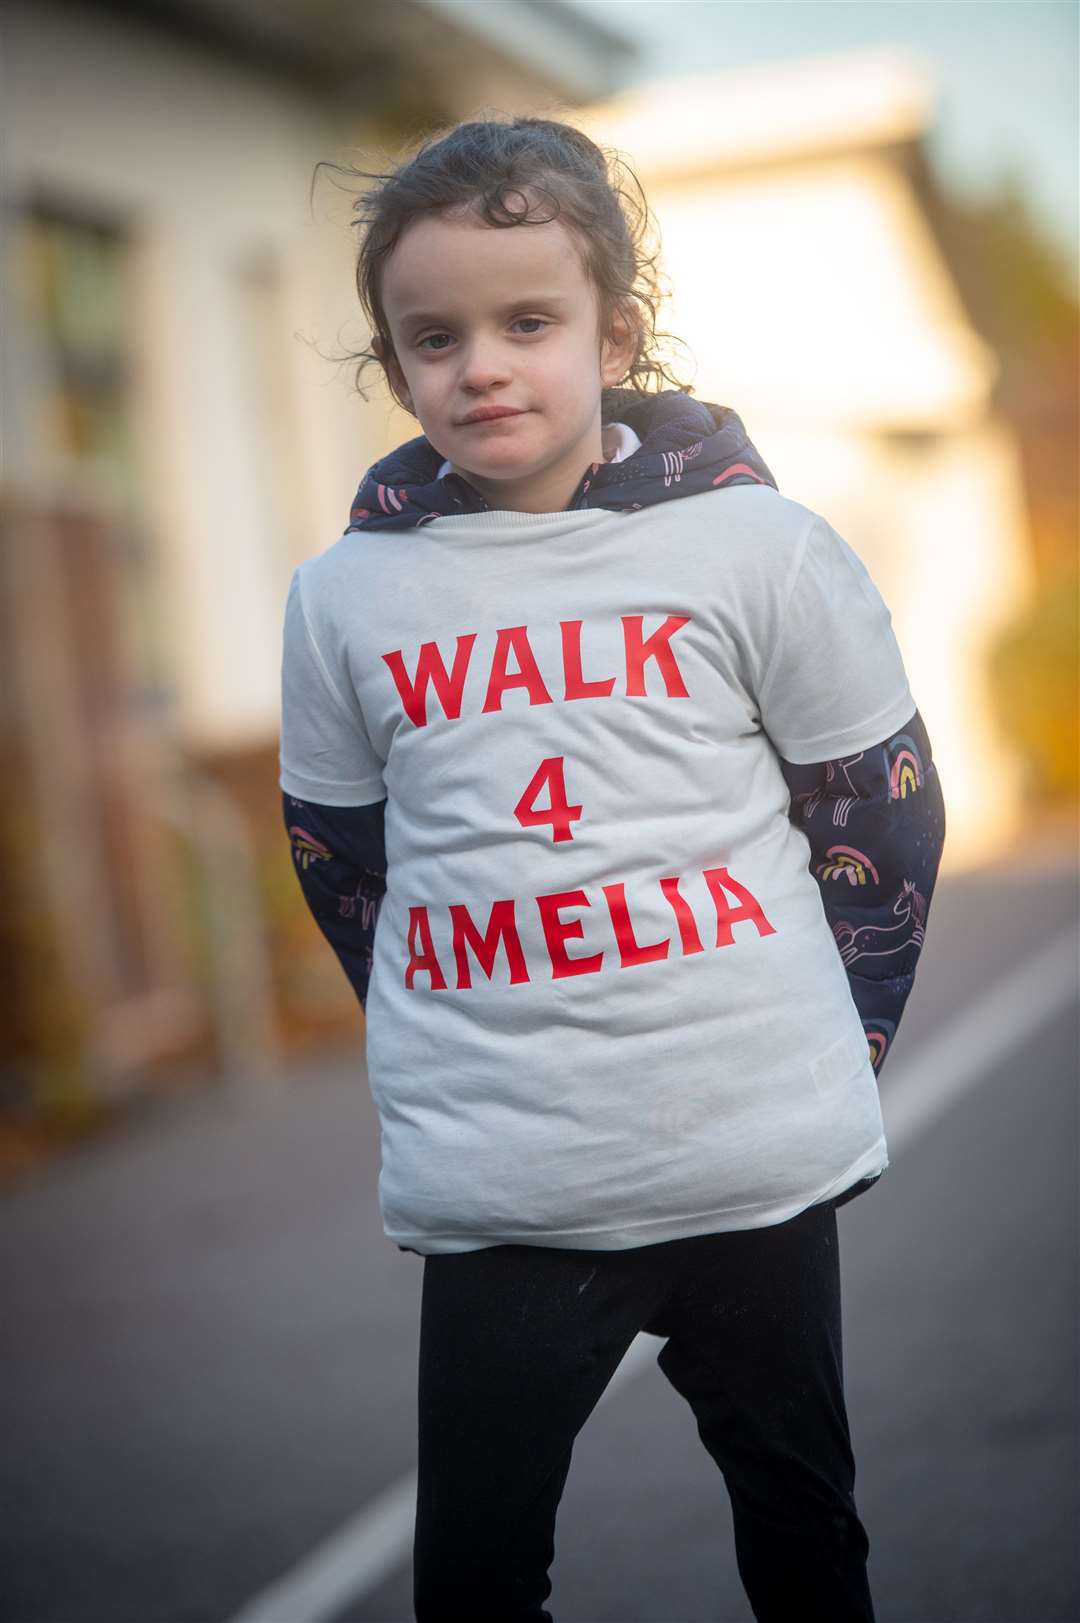 Amelia joined in the fundraising campaign.